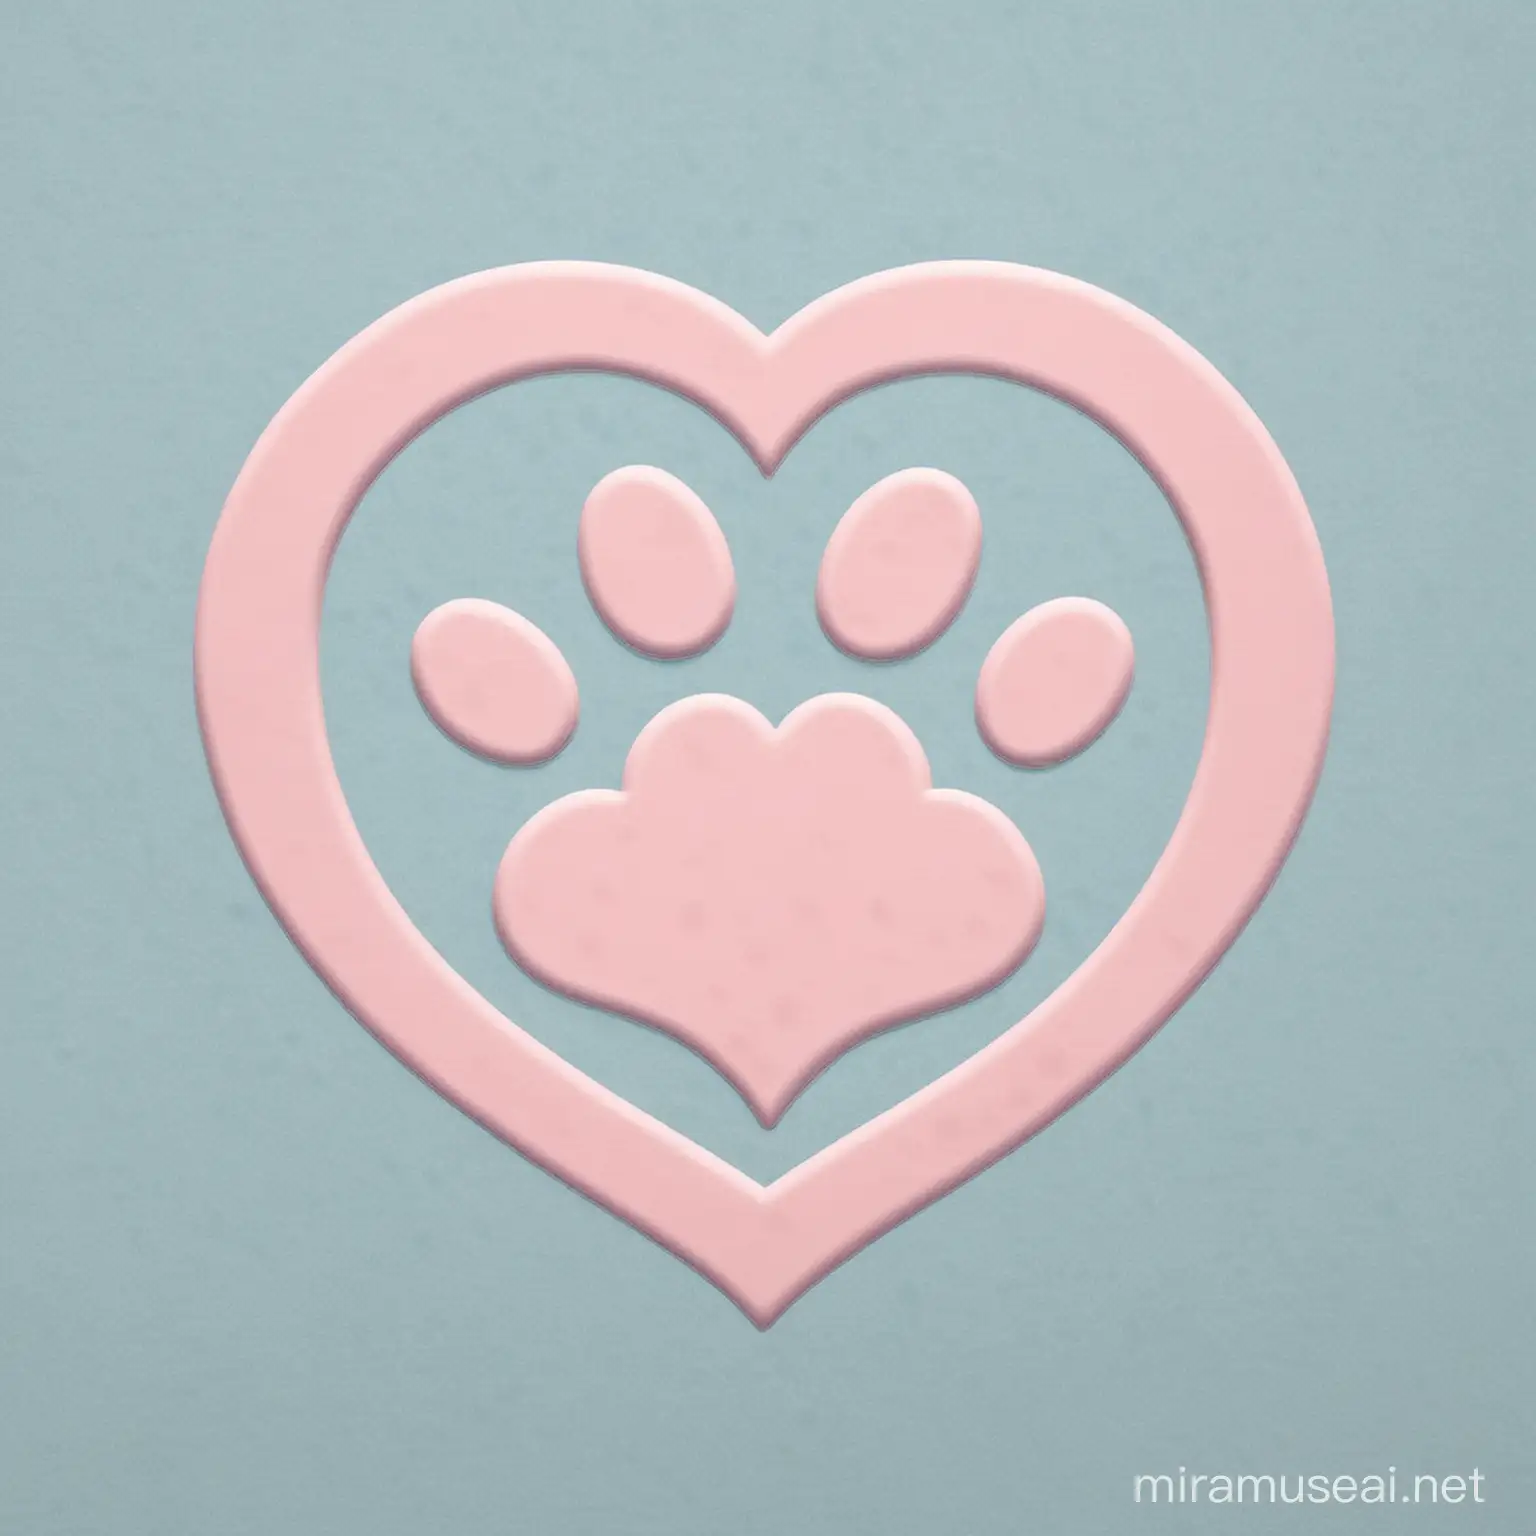 We are presenting a logo that will feature a smiling animal paw surrounded by a heart. The paw should be simple and recognizable, while the heart should add an emotional aspect. We prefer to use soft and gentle colors such as light blue, light pink or light yellow. The logo name is PetParadise